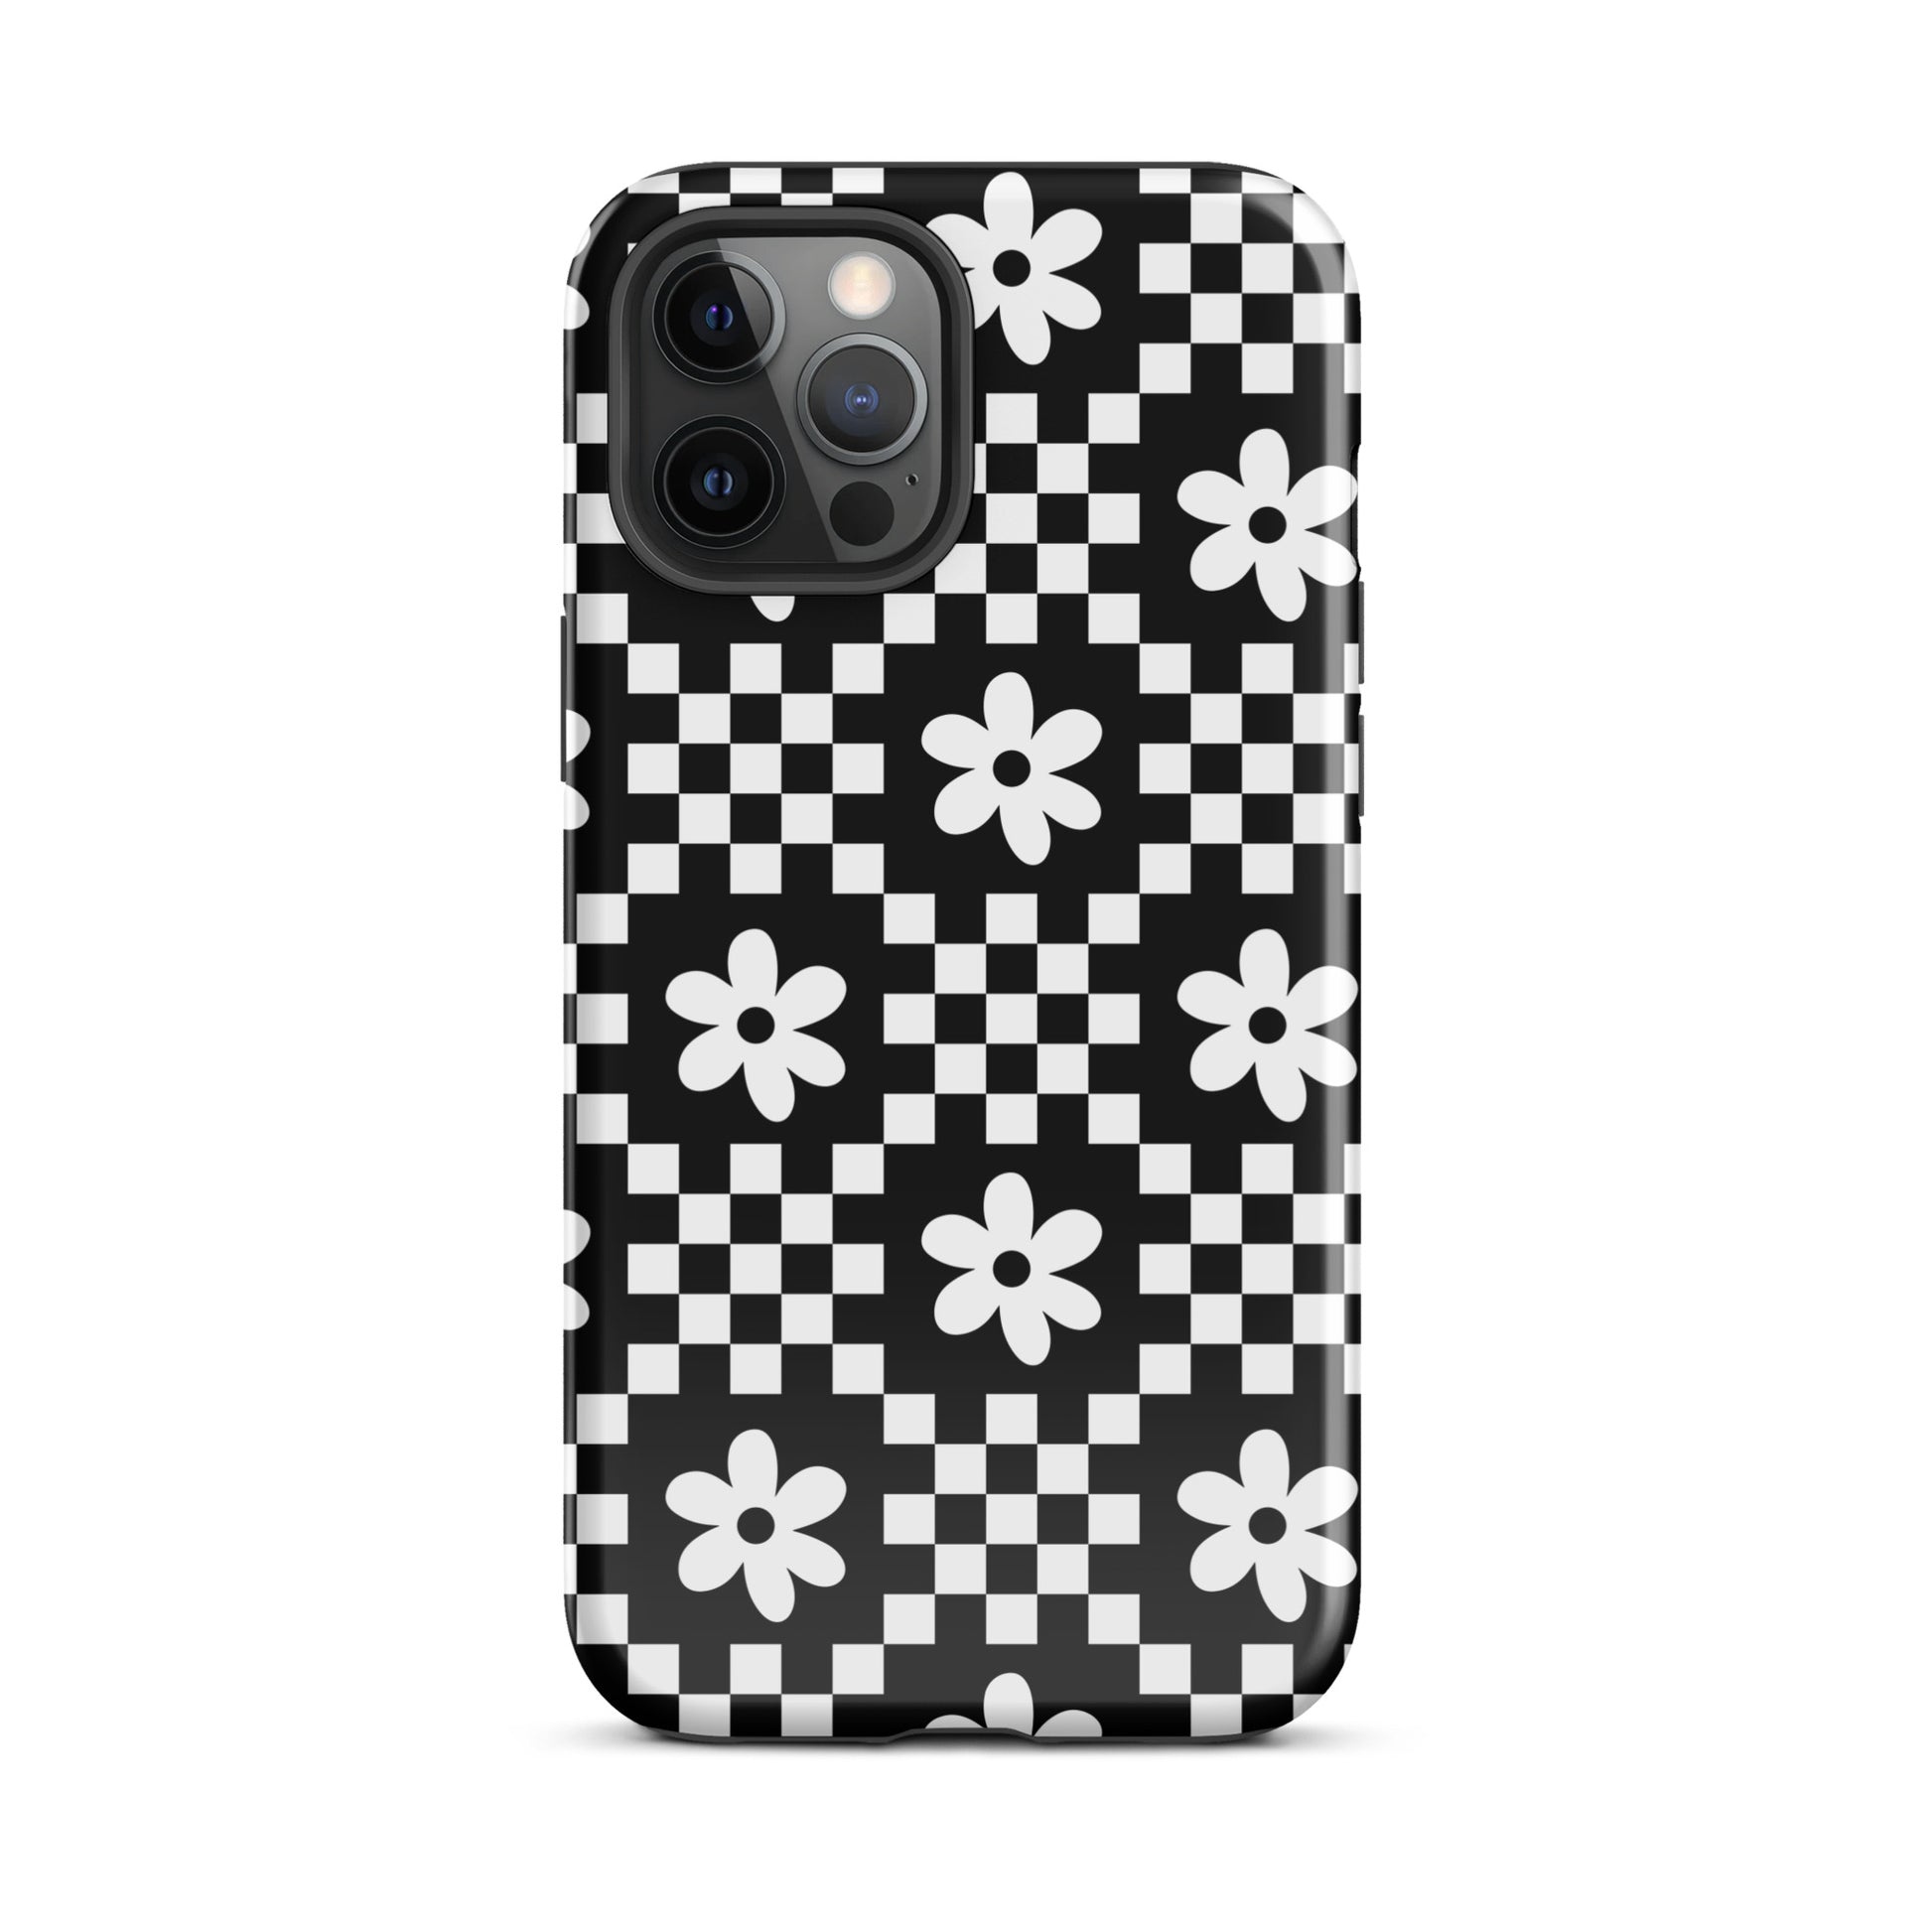 Checkerboard Daisy iPhone Case iPhone 12 Pro Max Glossy